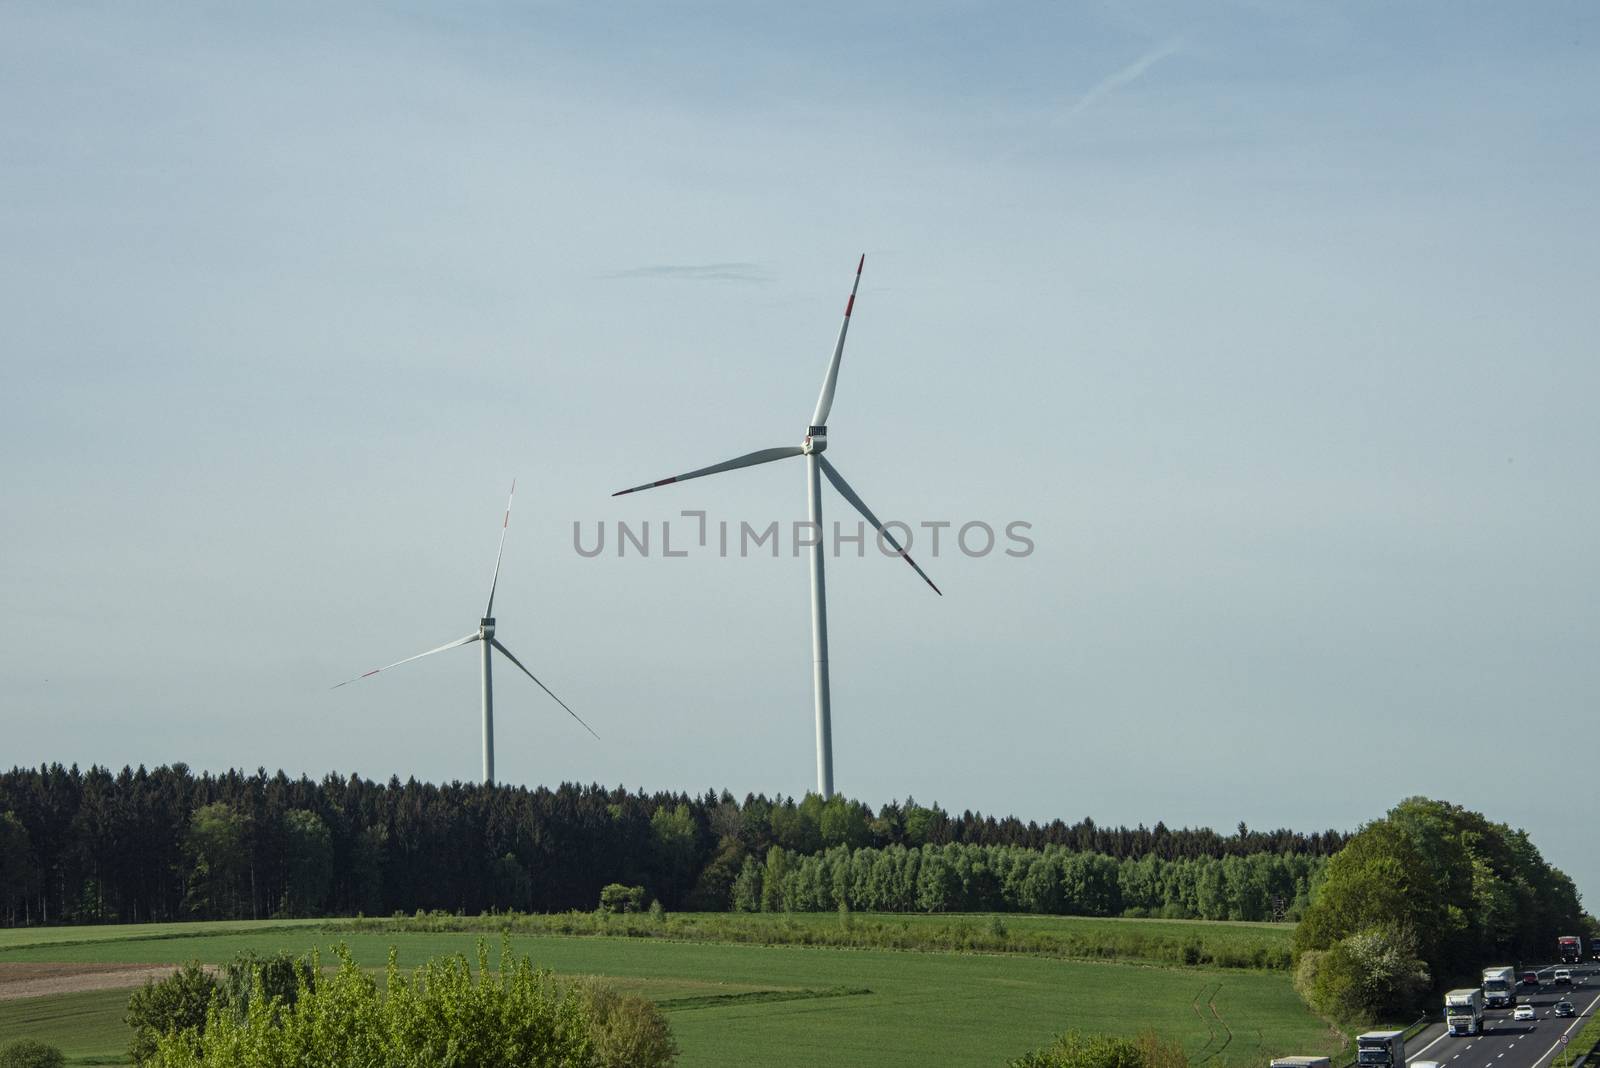 DE, North Rhine-Westphalia - April 2018: Pair of Wind turbines or power windmills over the Germany country side